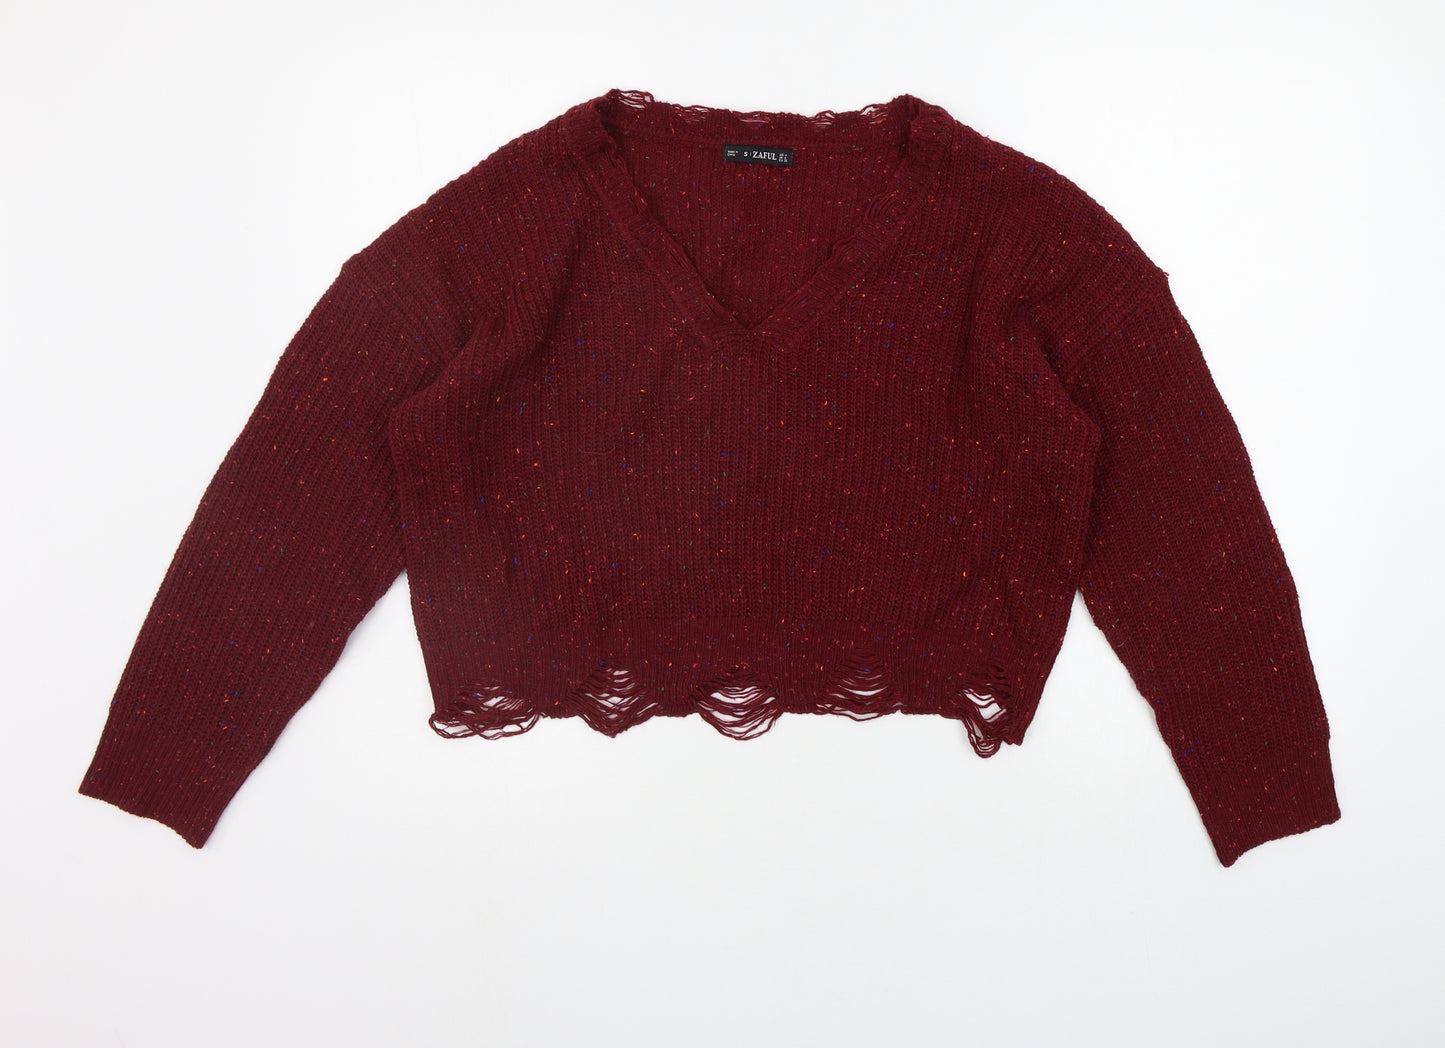 Zaful Womens Red   Pullover Jumper Size 8